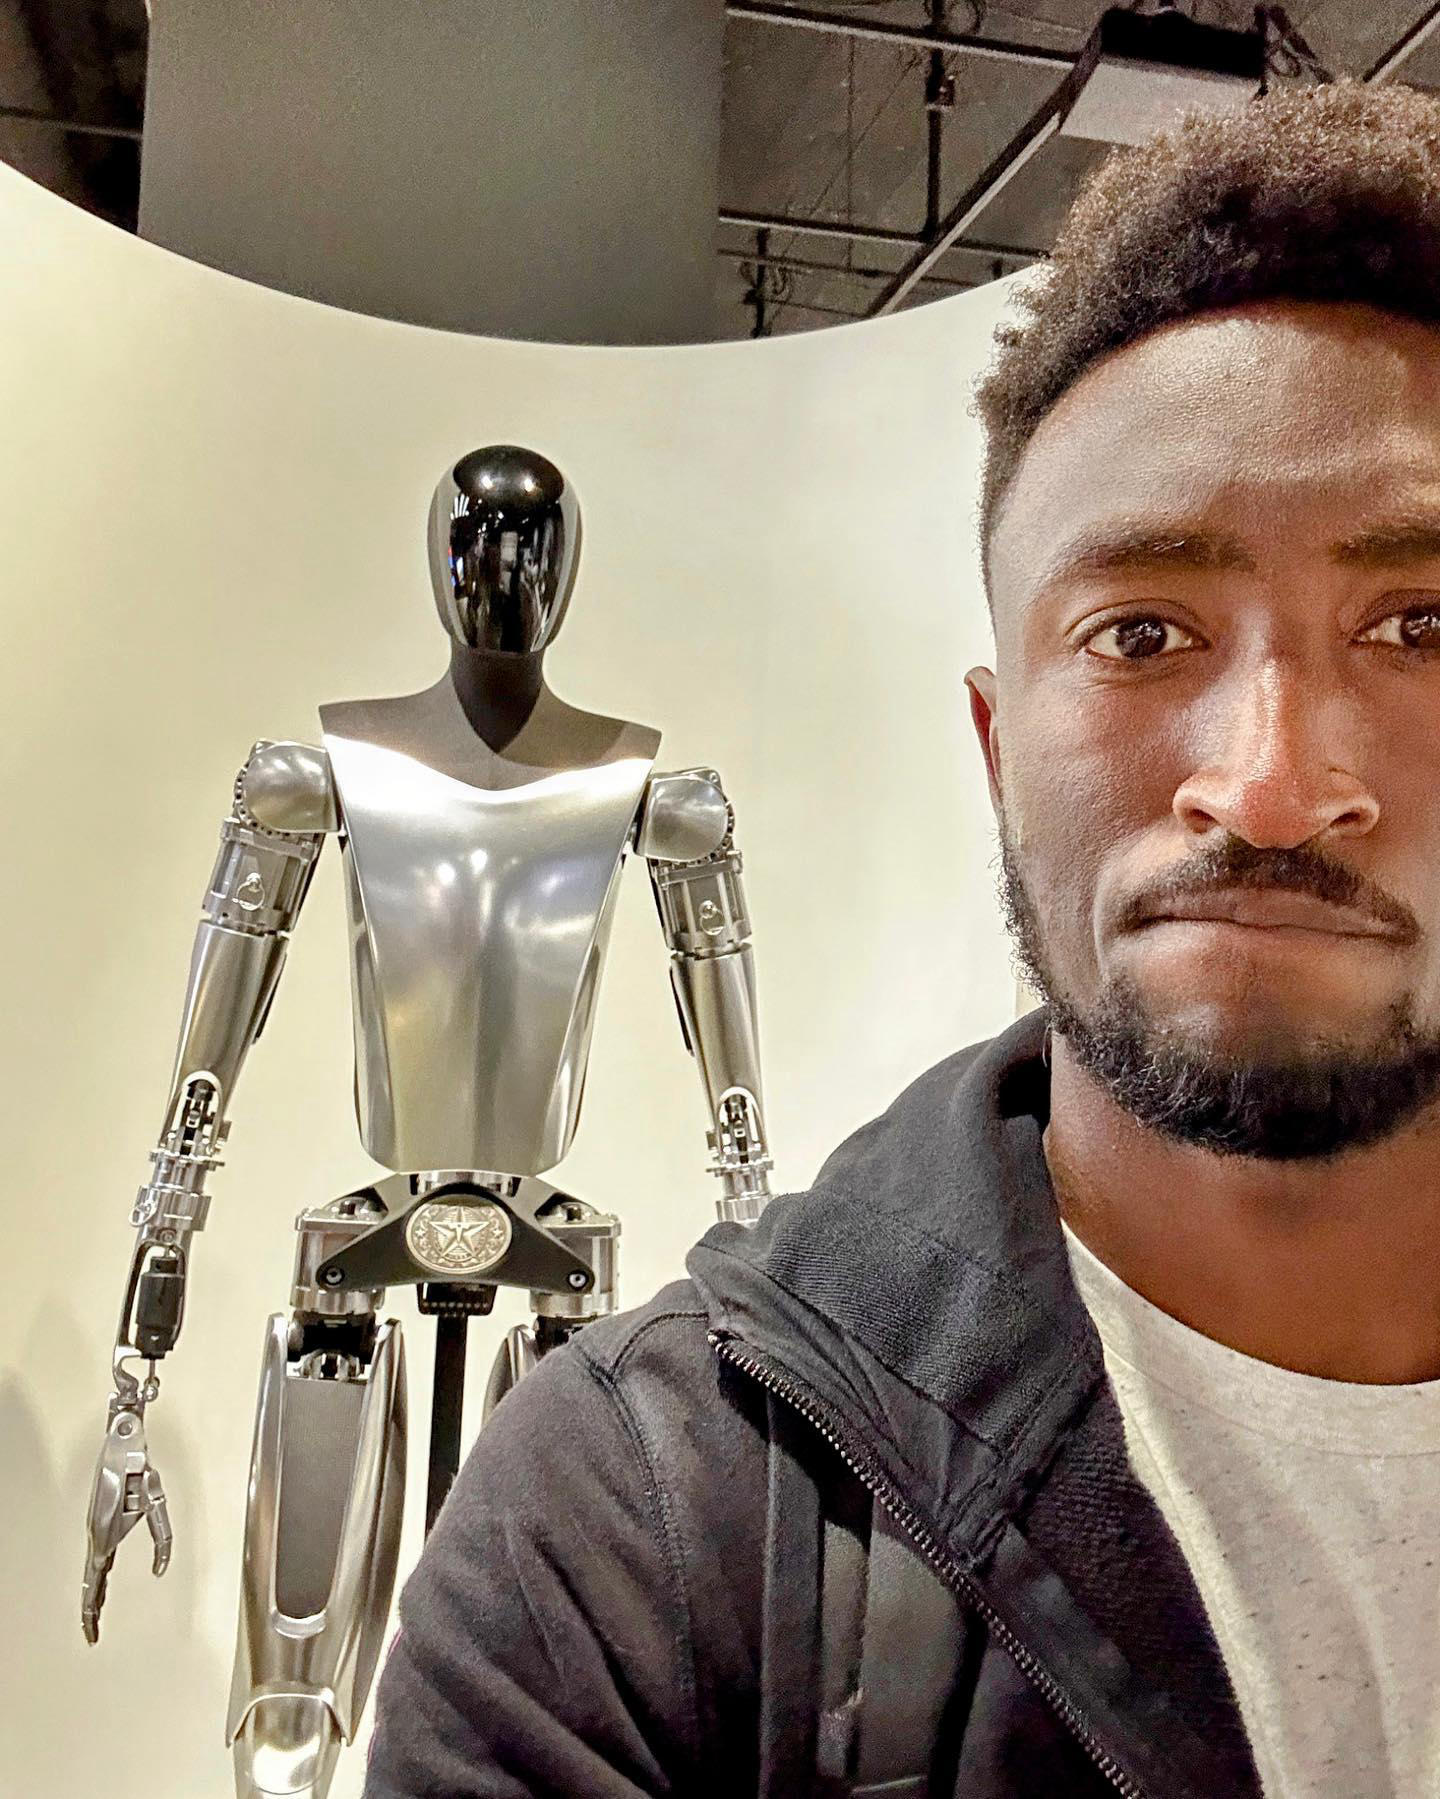 image  1 Marques Brownlee - I'm still in camp humanoid robots are silly and hoping someone can change my mi